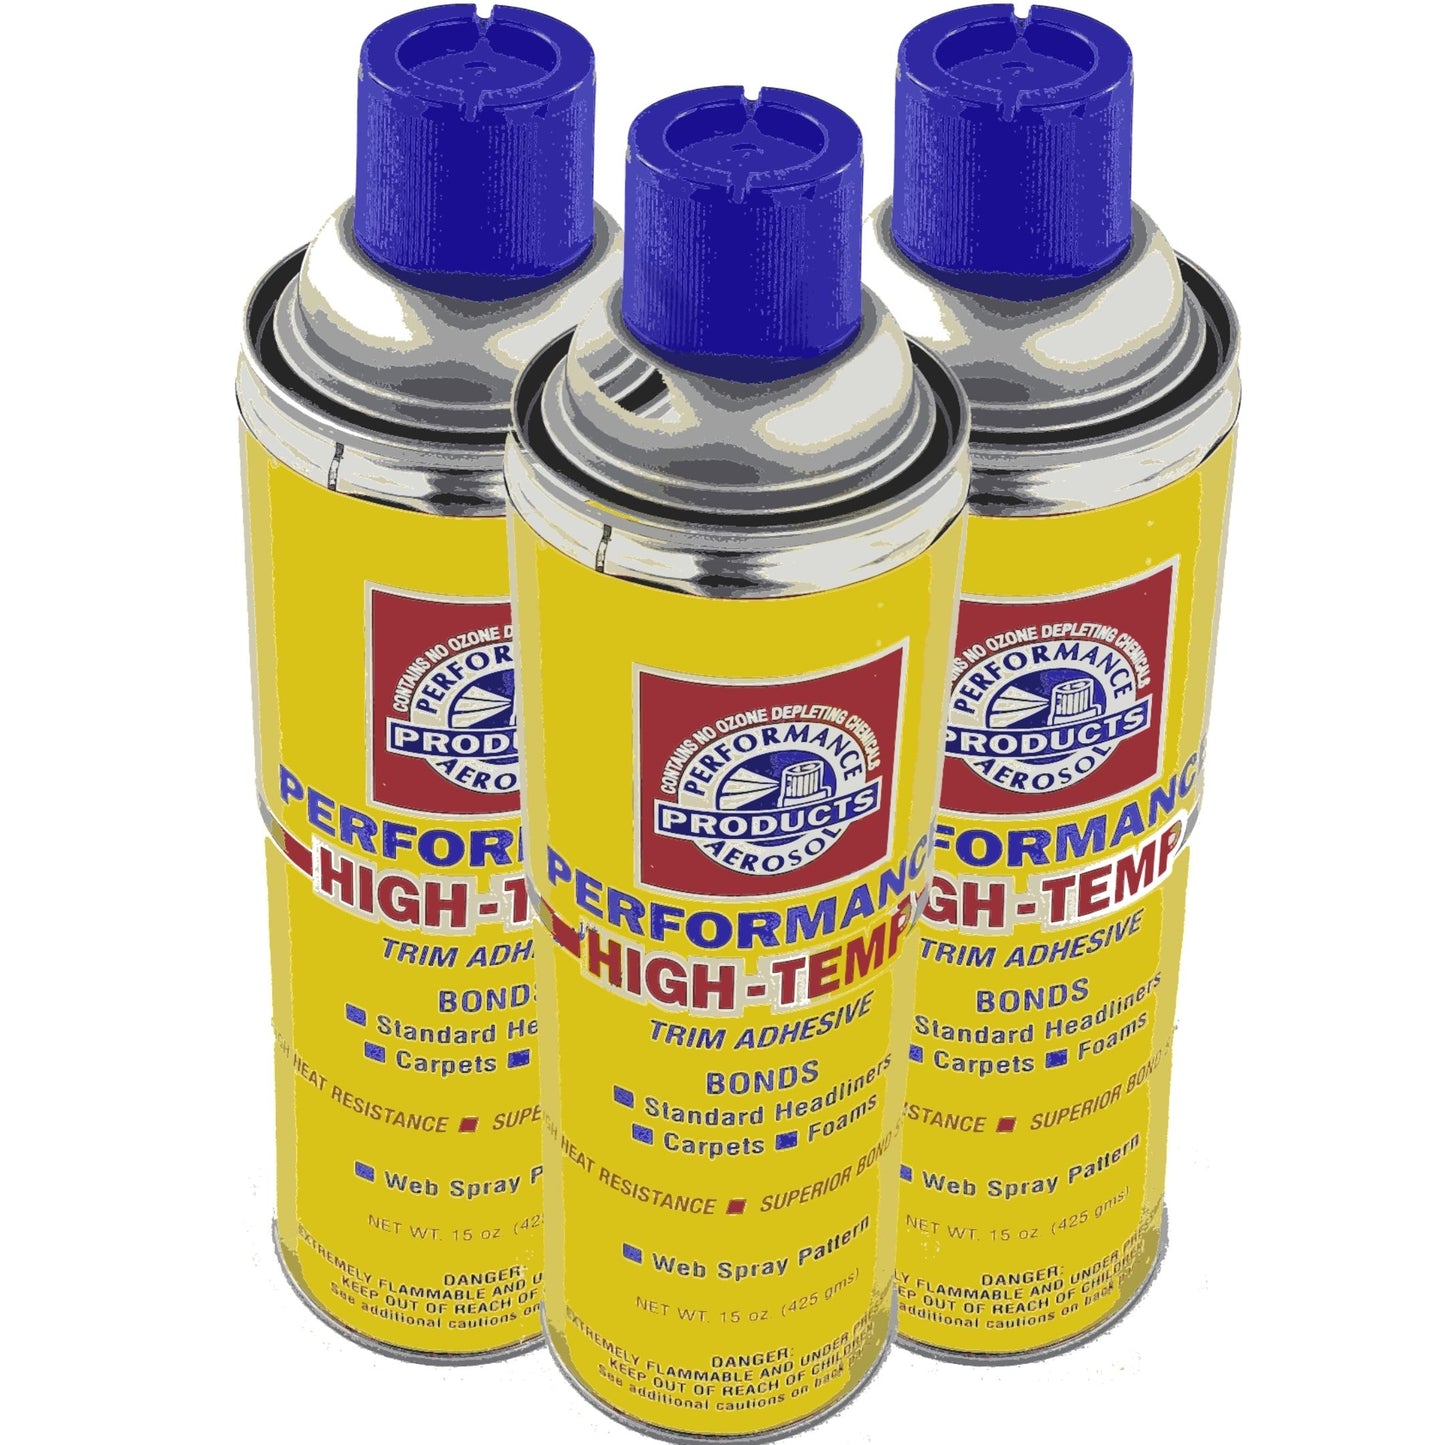 ES2000 Foam and Fabric Spray Adhesive Glue - DISCOUNTS AT 12 AND 36 CANS